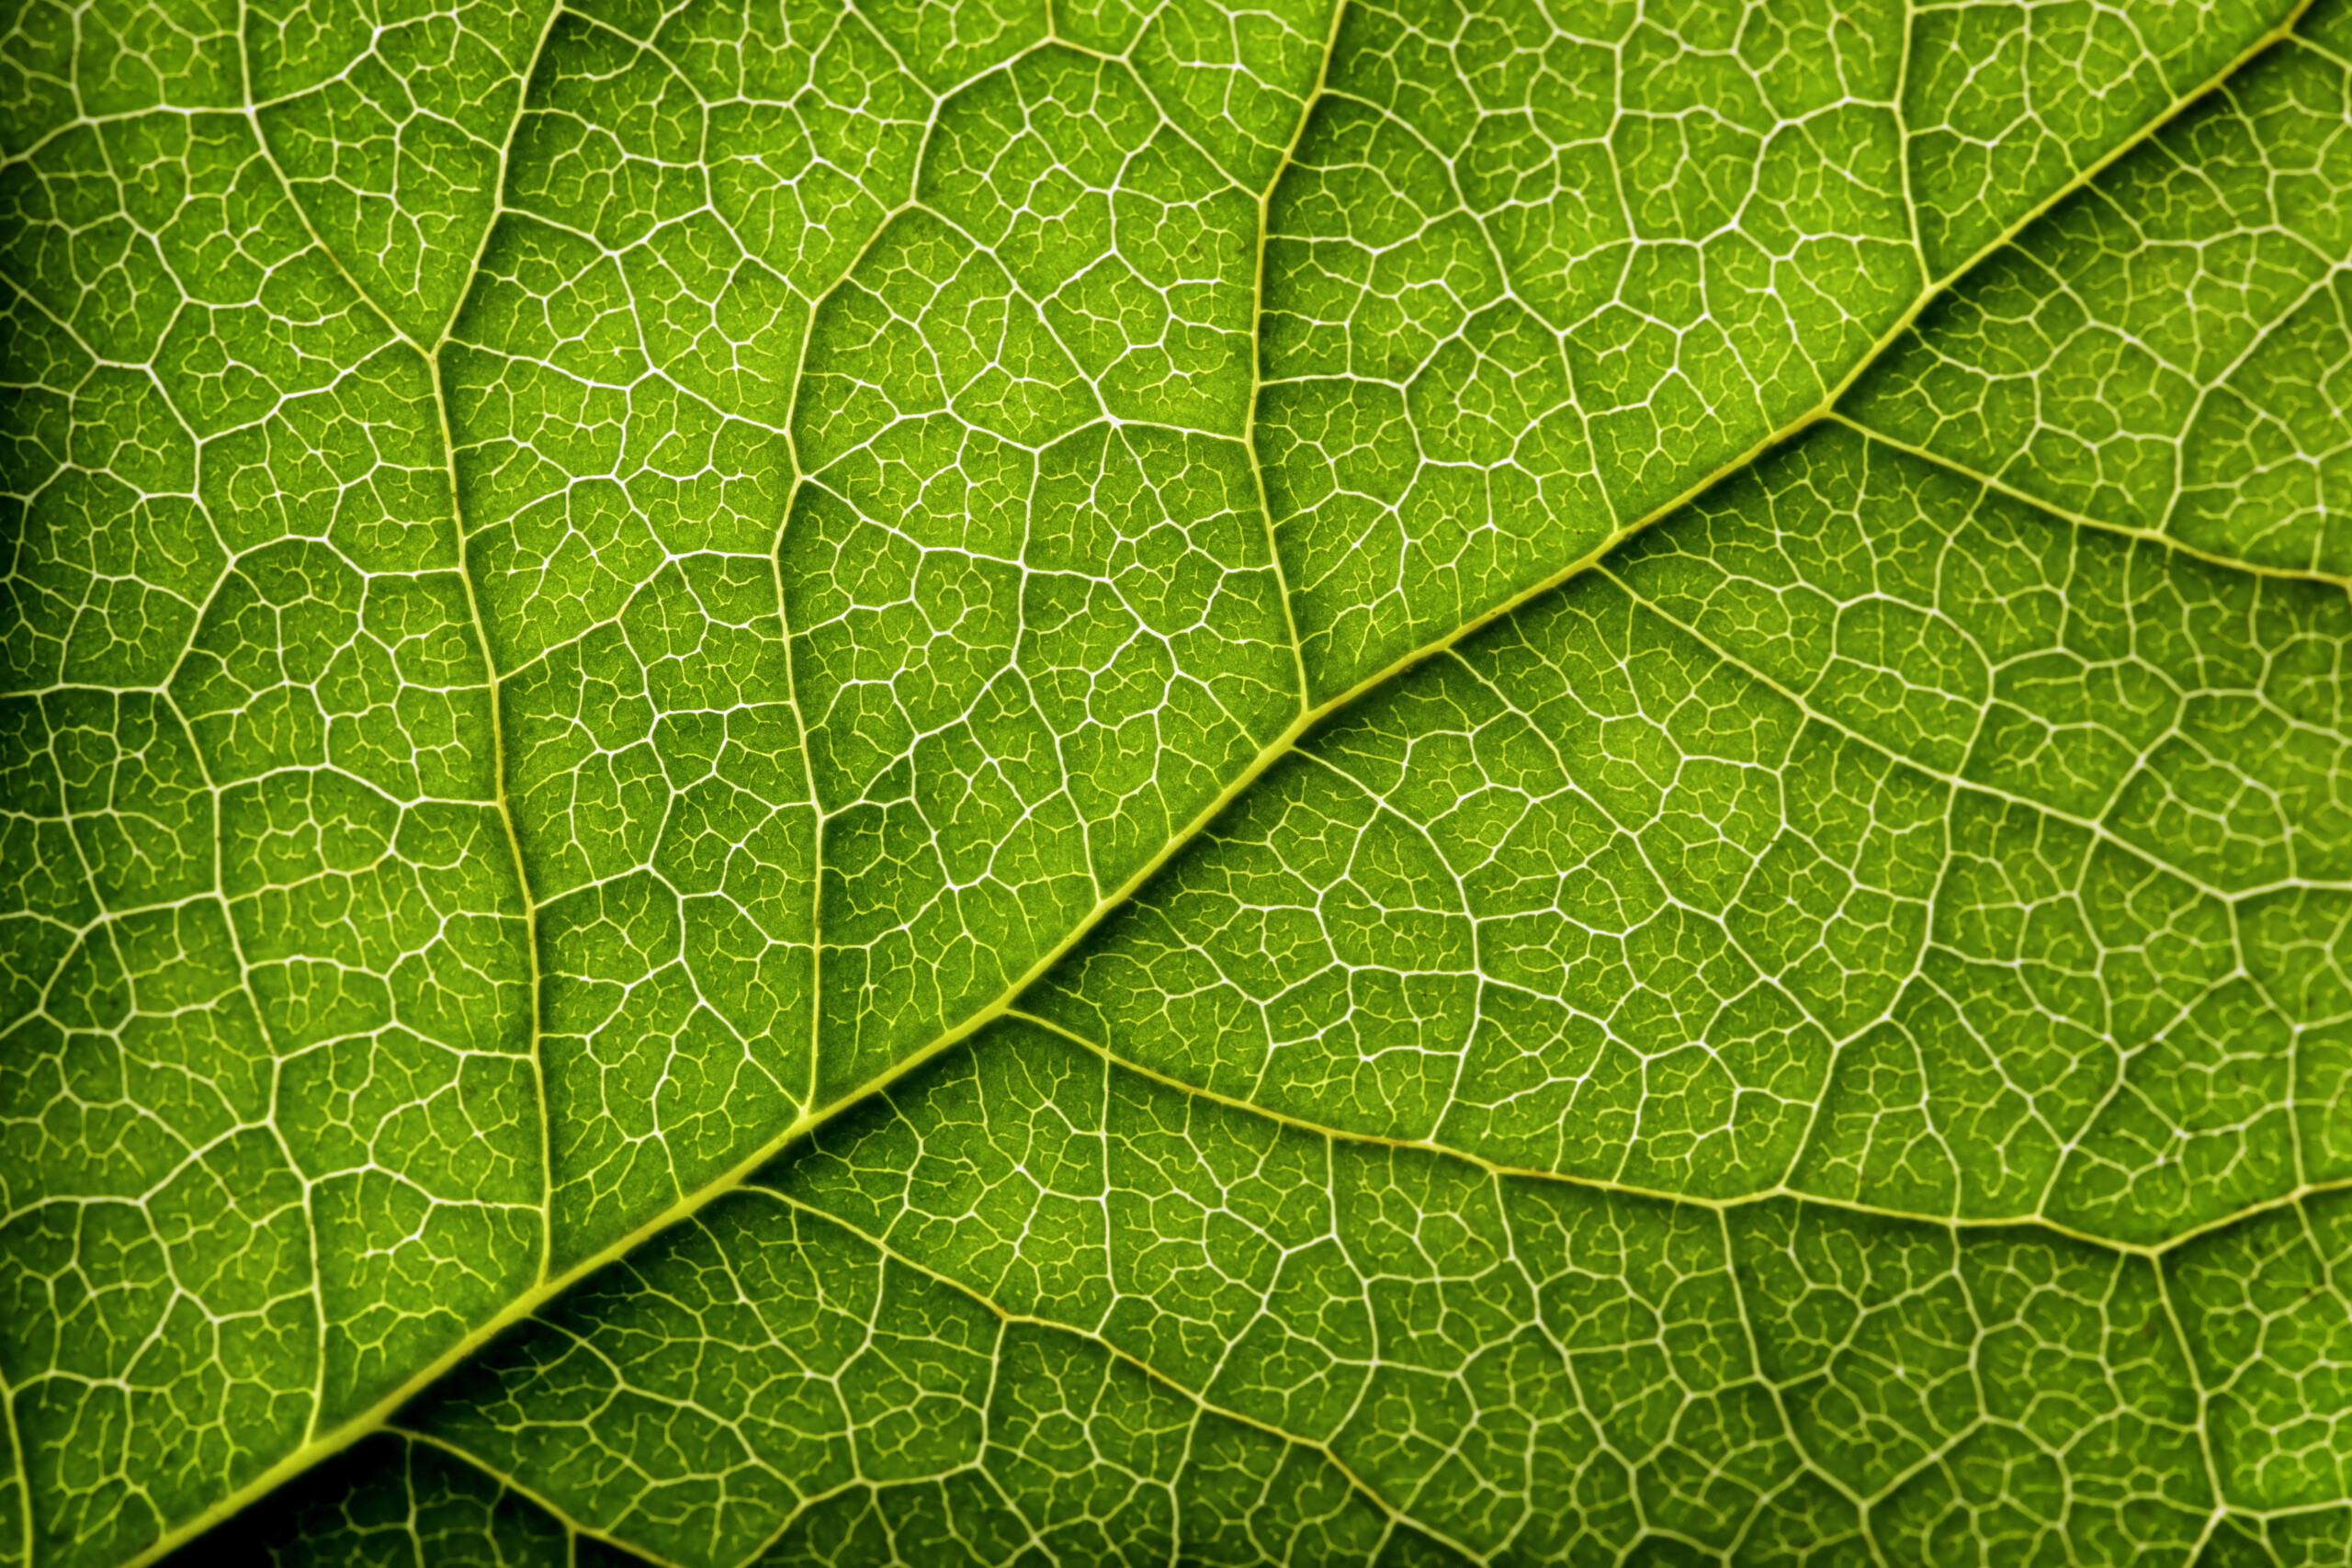 Green leaf - zoomed in